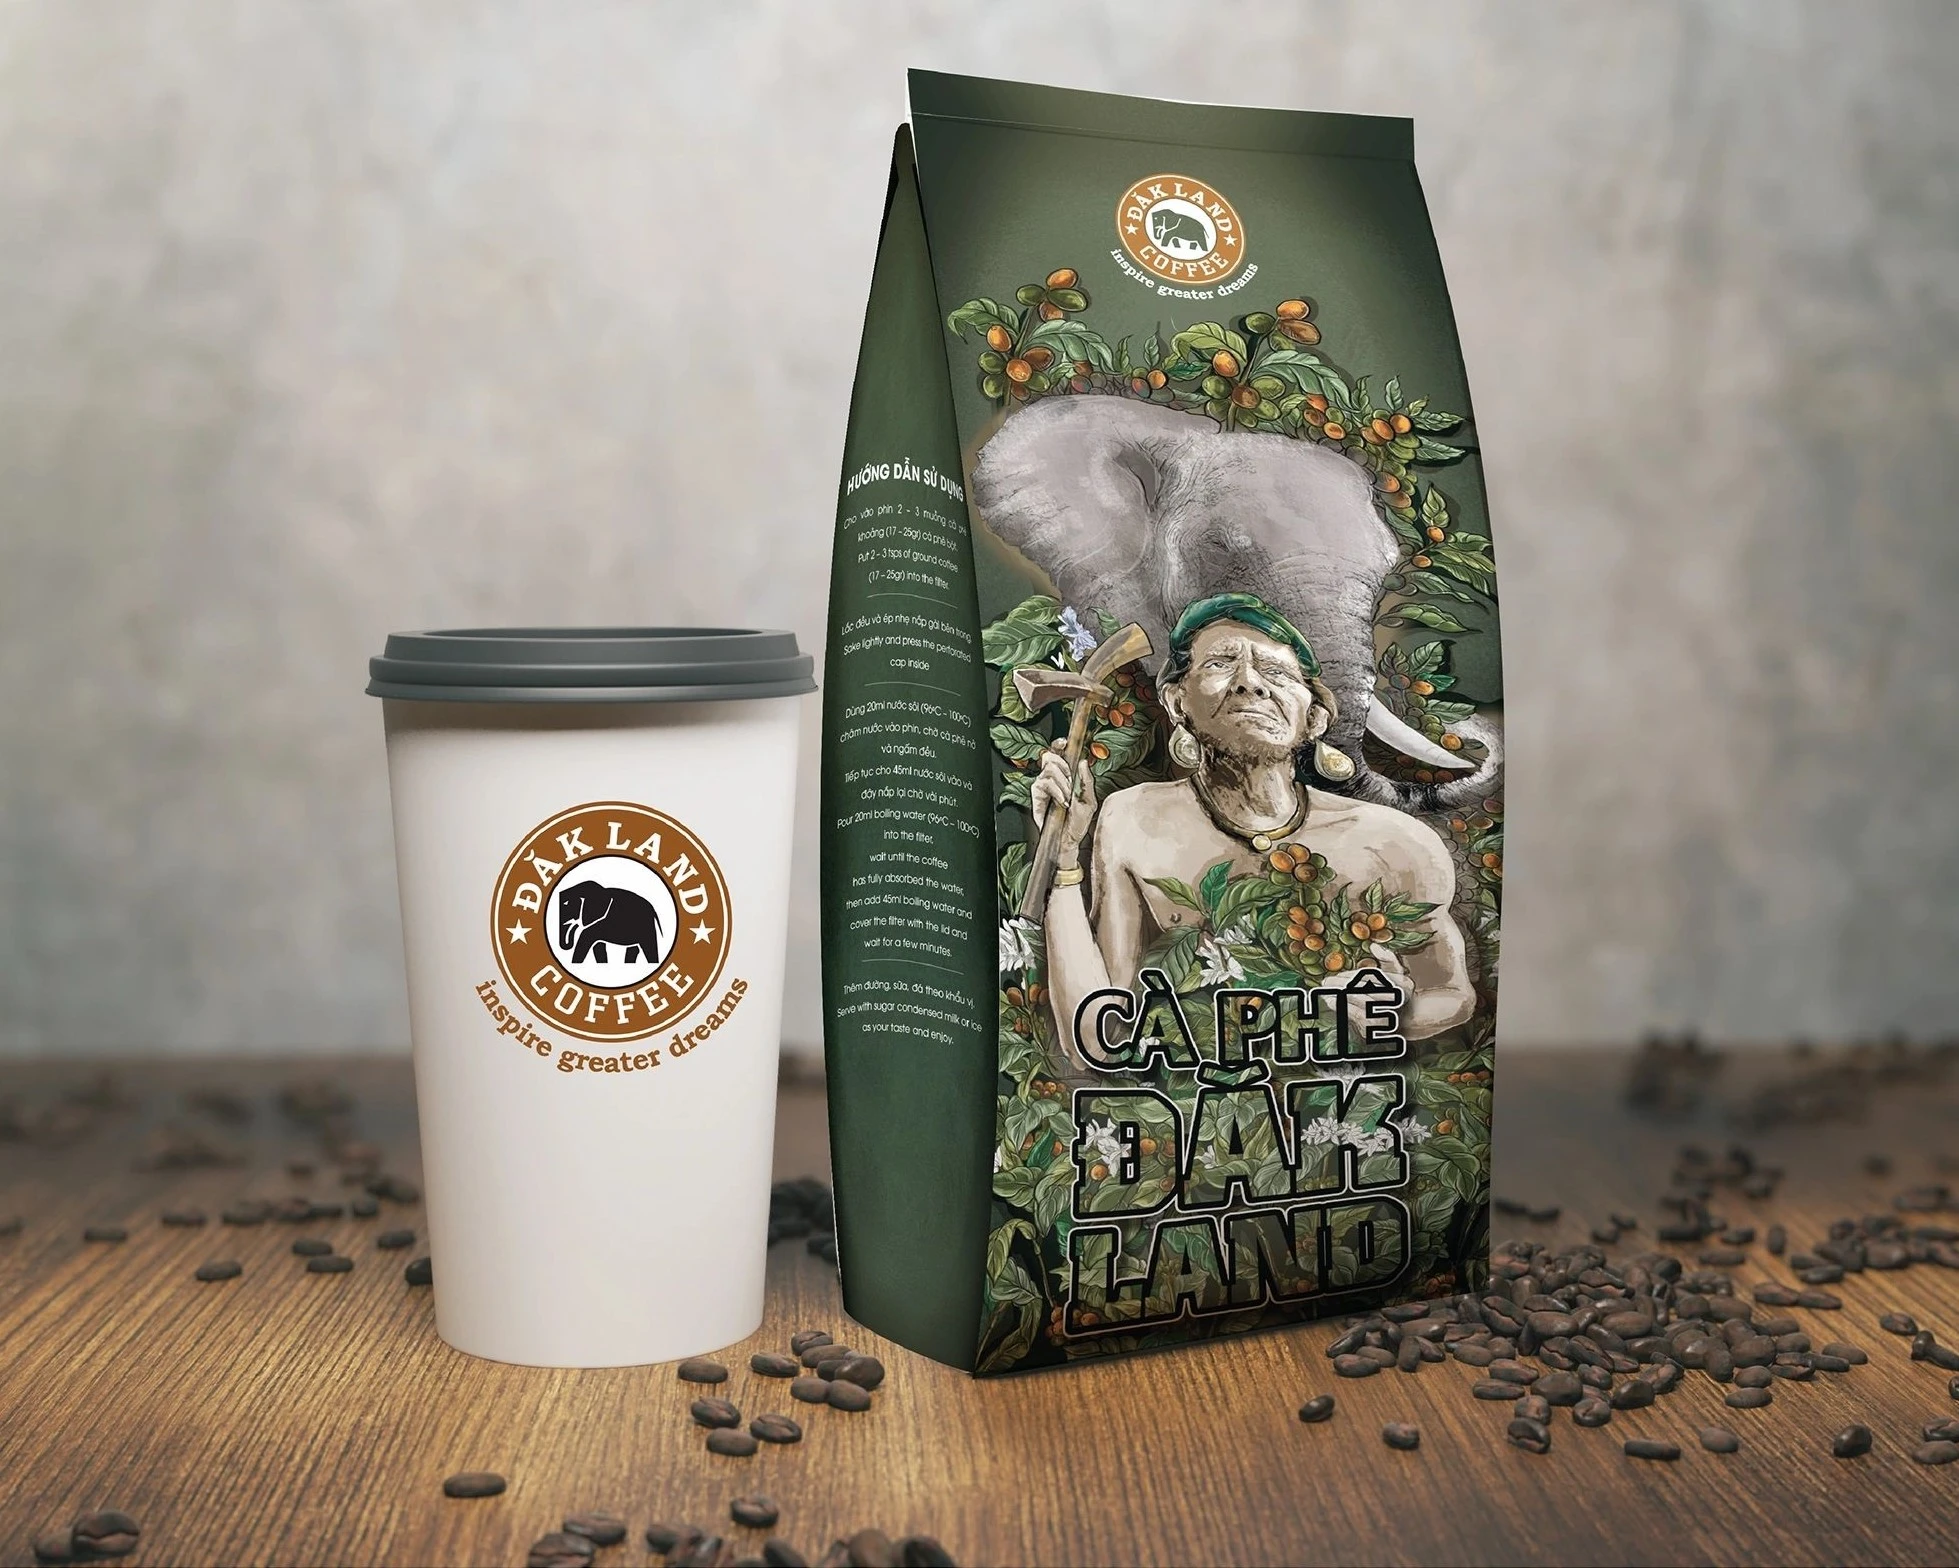 Mixed roasted Bean Coffee high quality made from Daklands in Vietnam